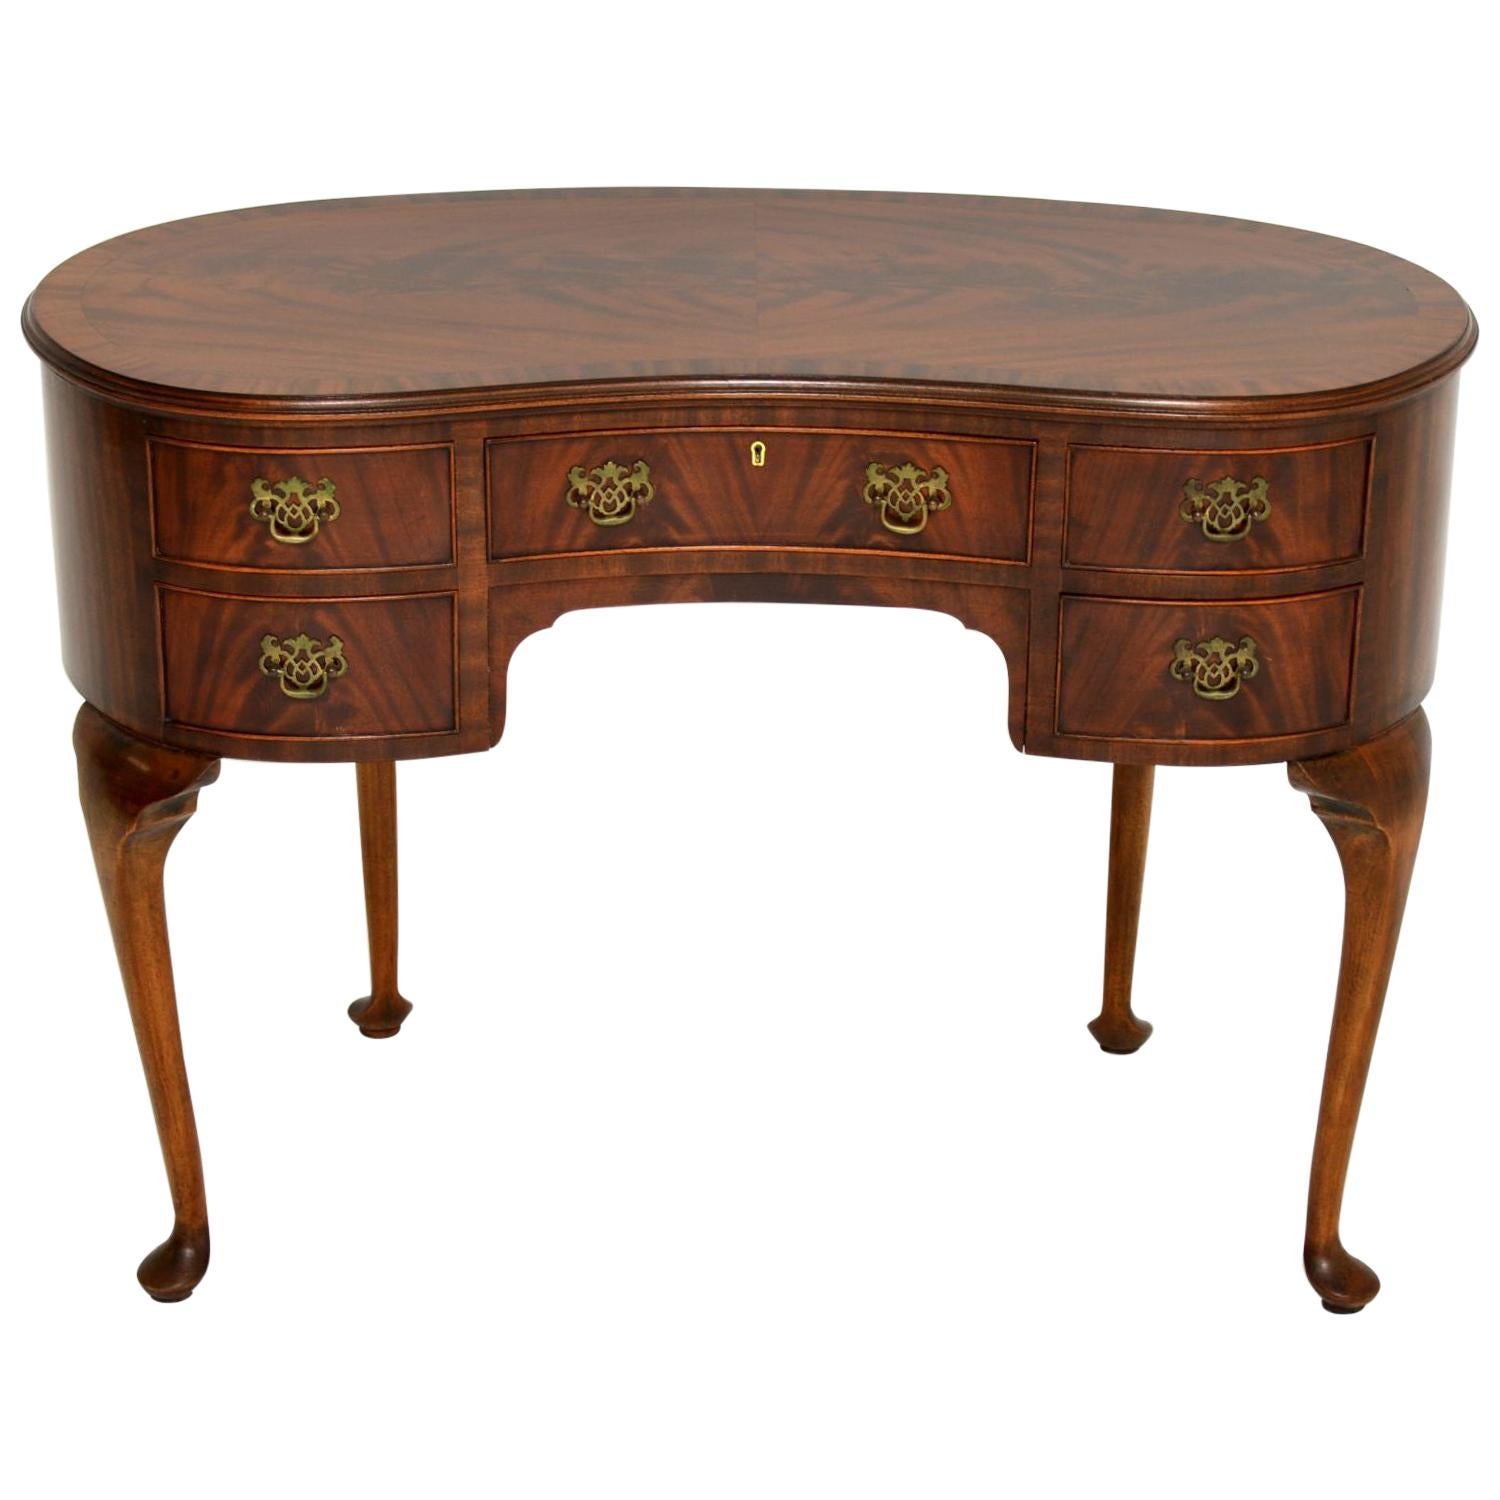 Antique Queen Anne Style Mahogany Kidney Desk / Dressing Table